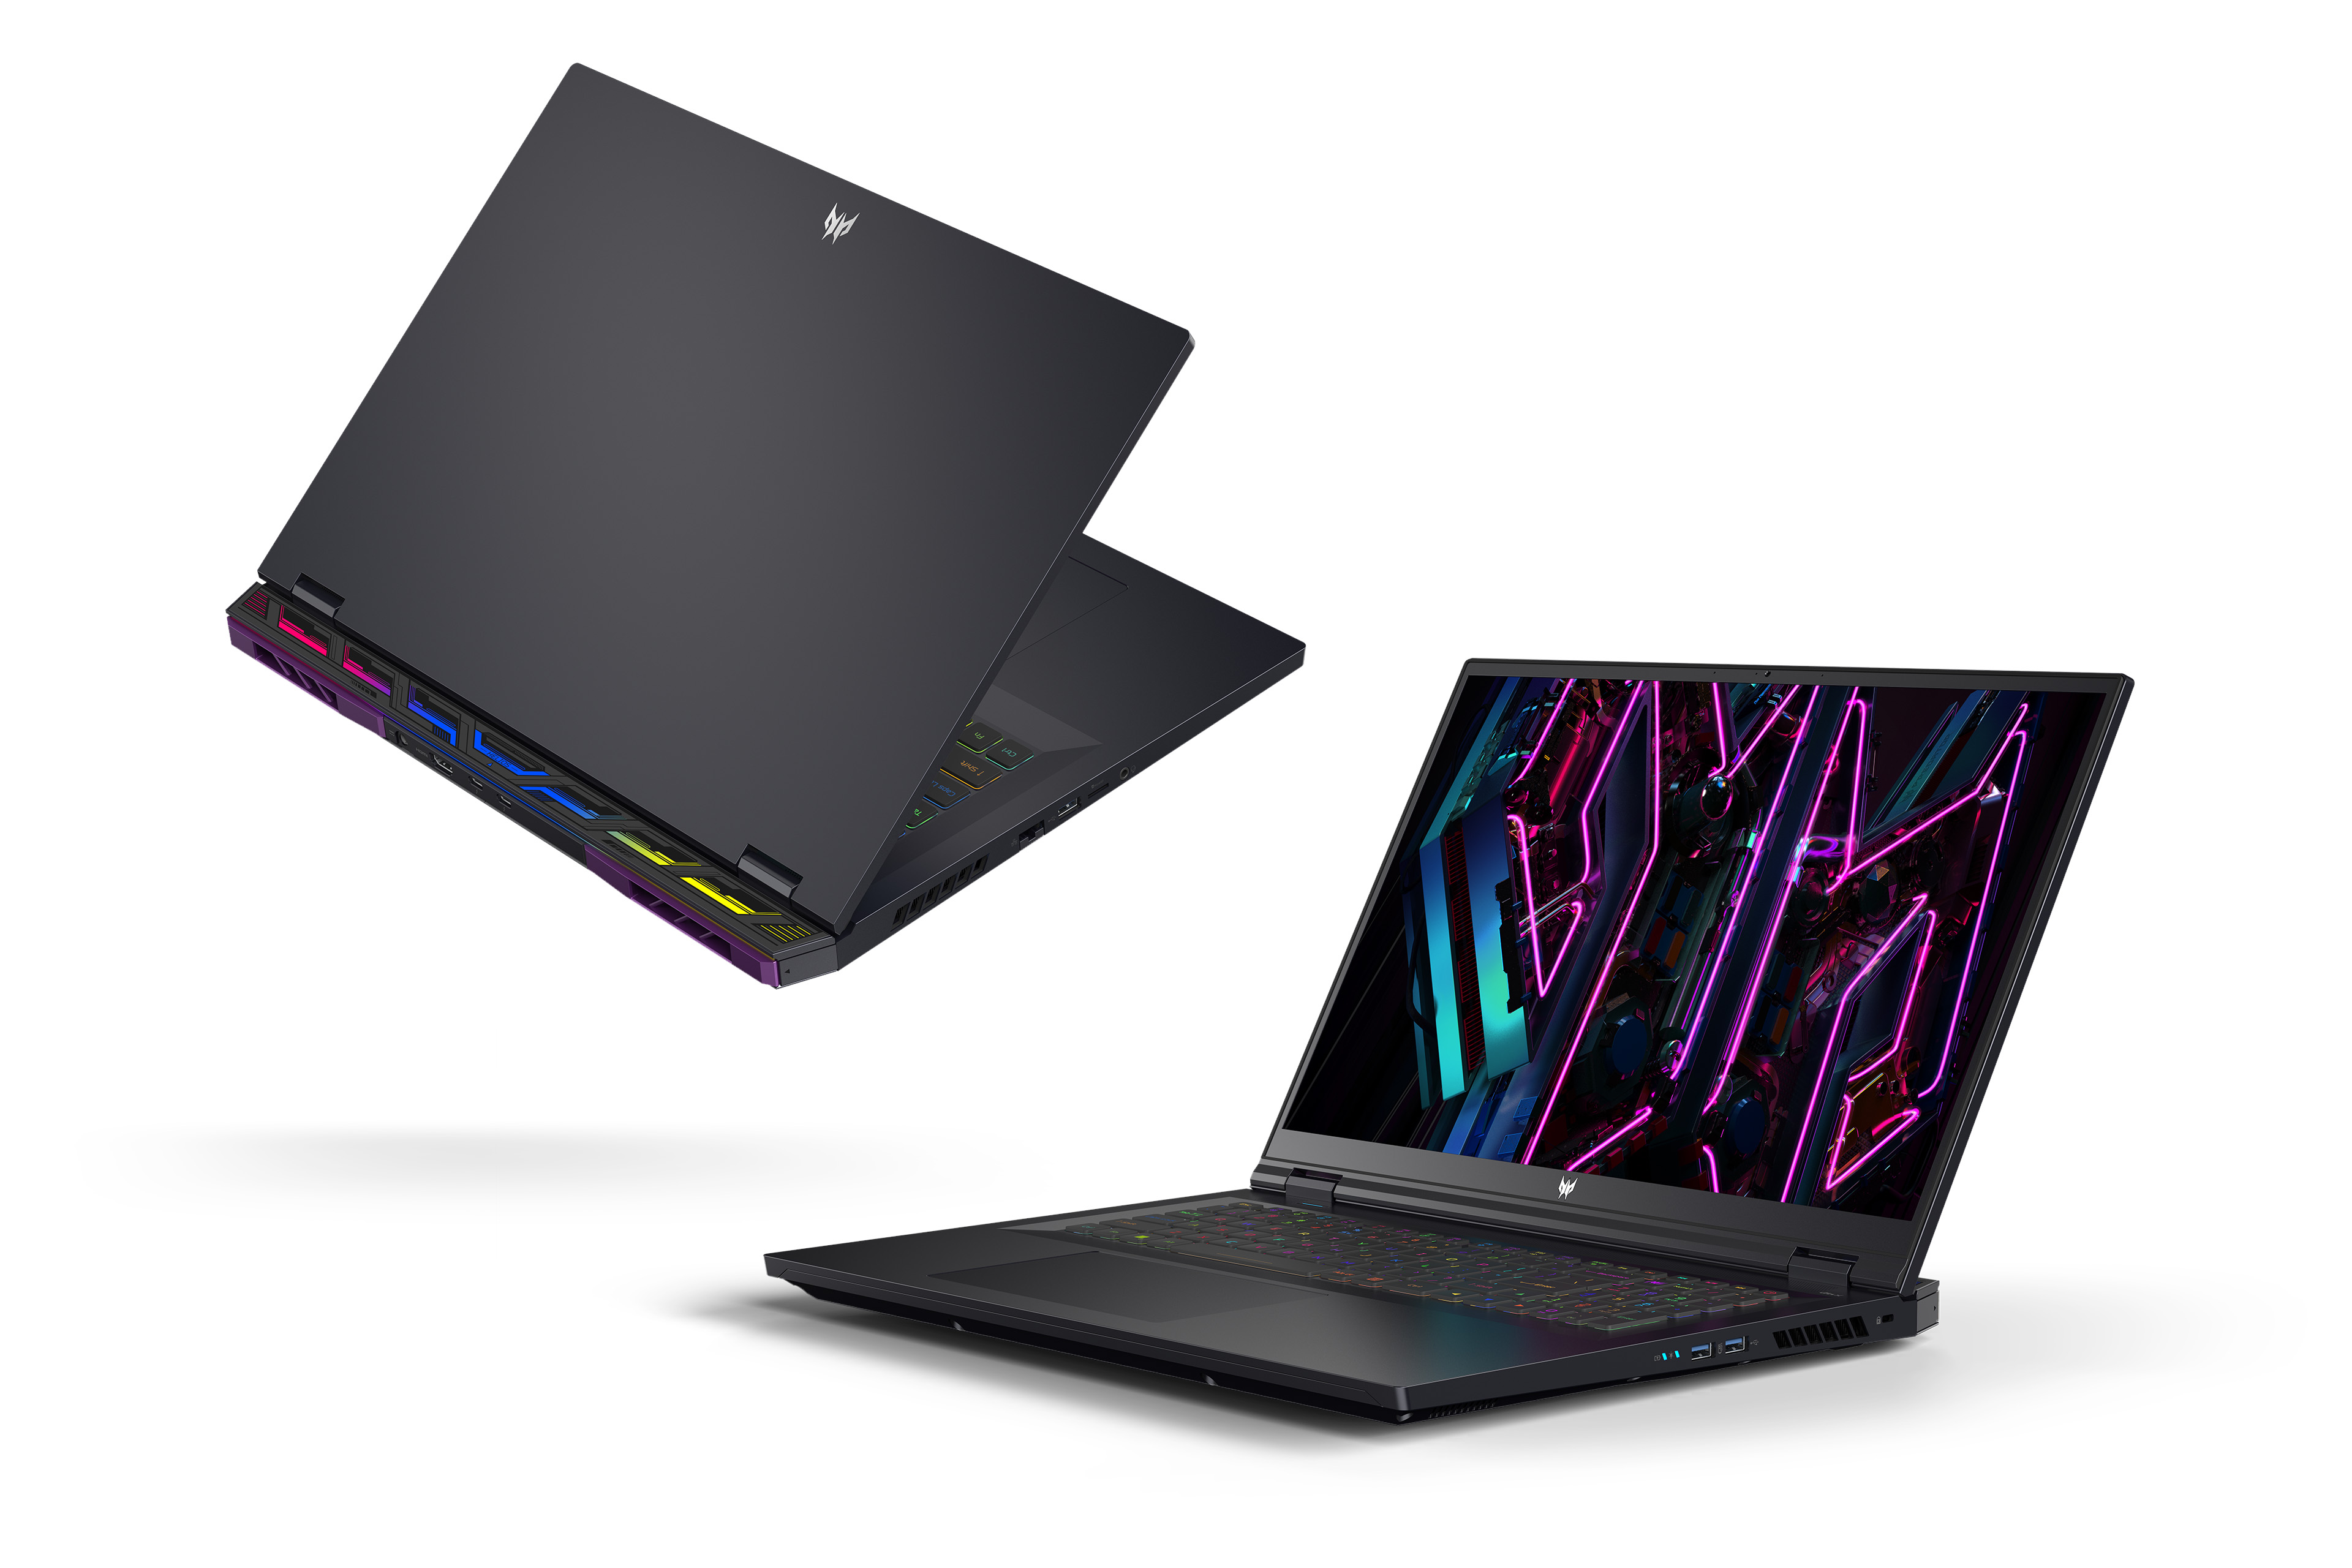 Acer Boosts Its Gaming Portfolio With New Predator Laptops And Monitors